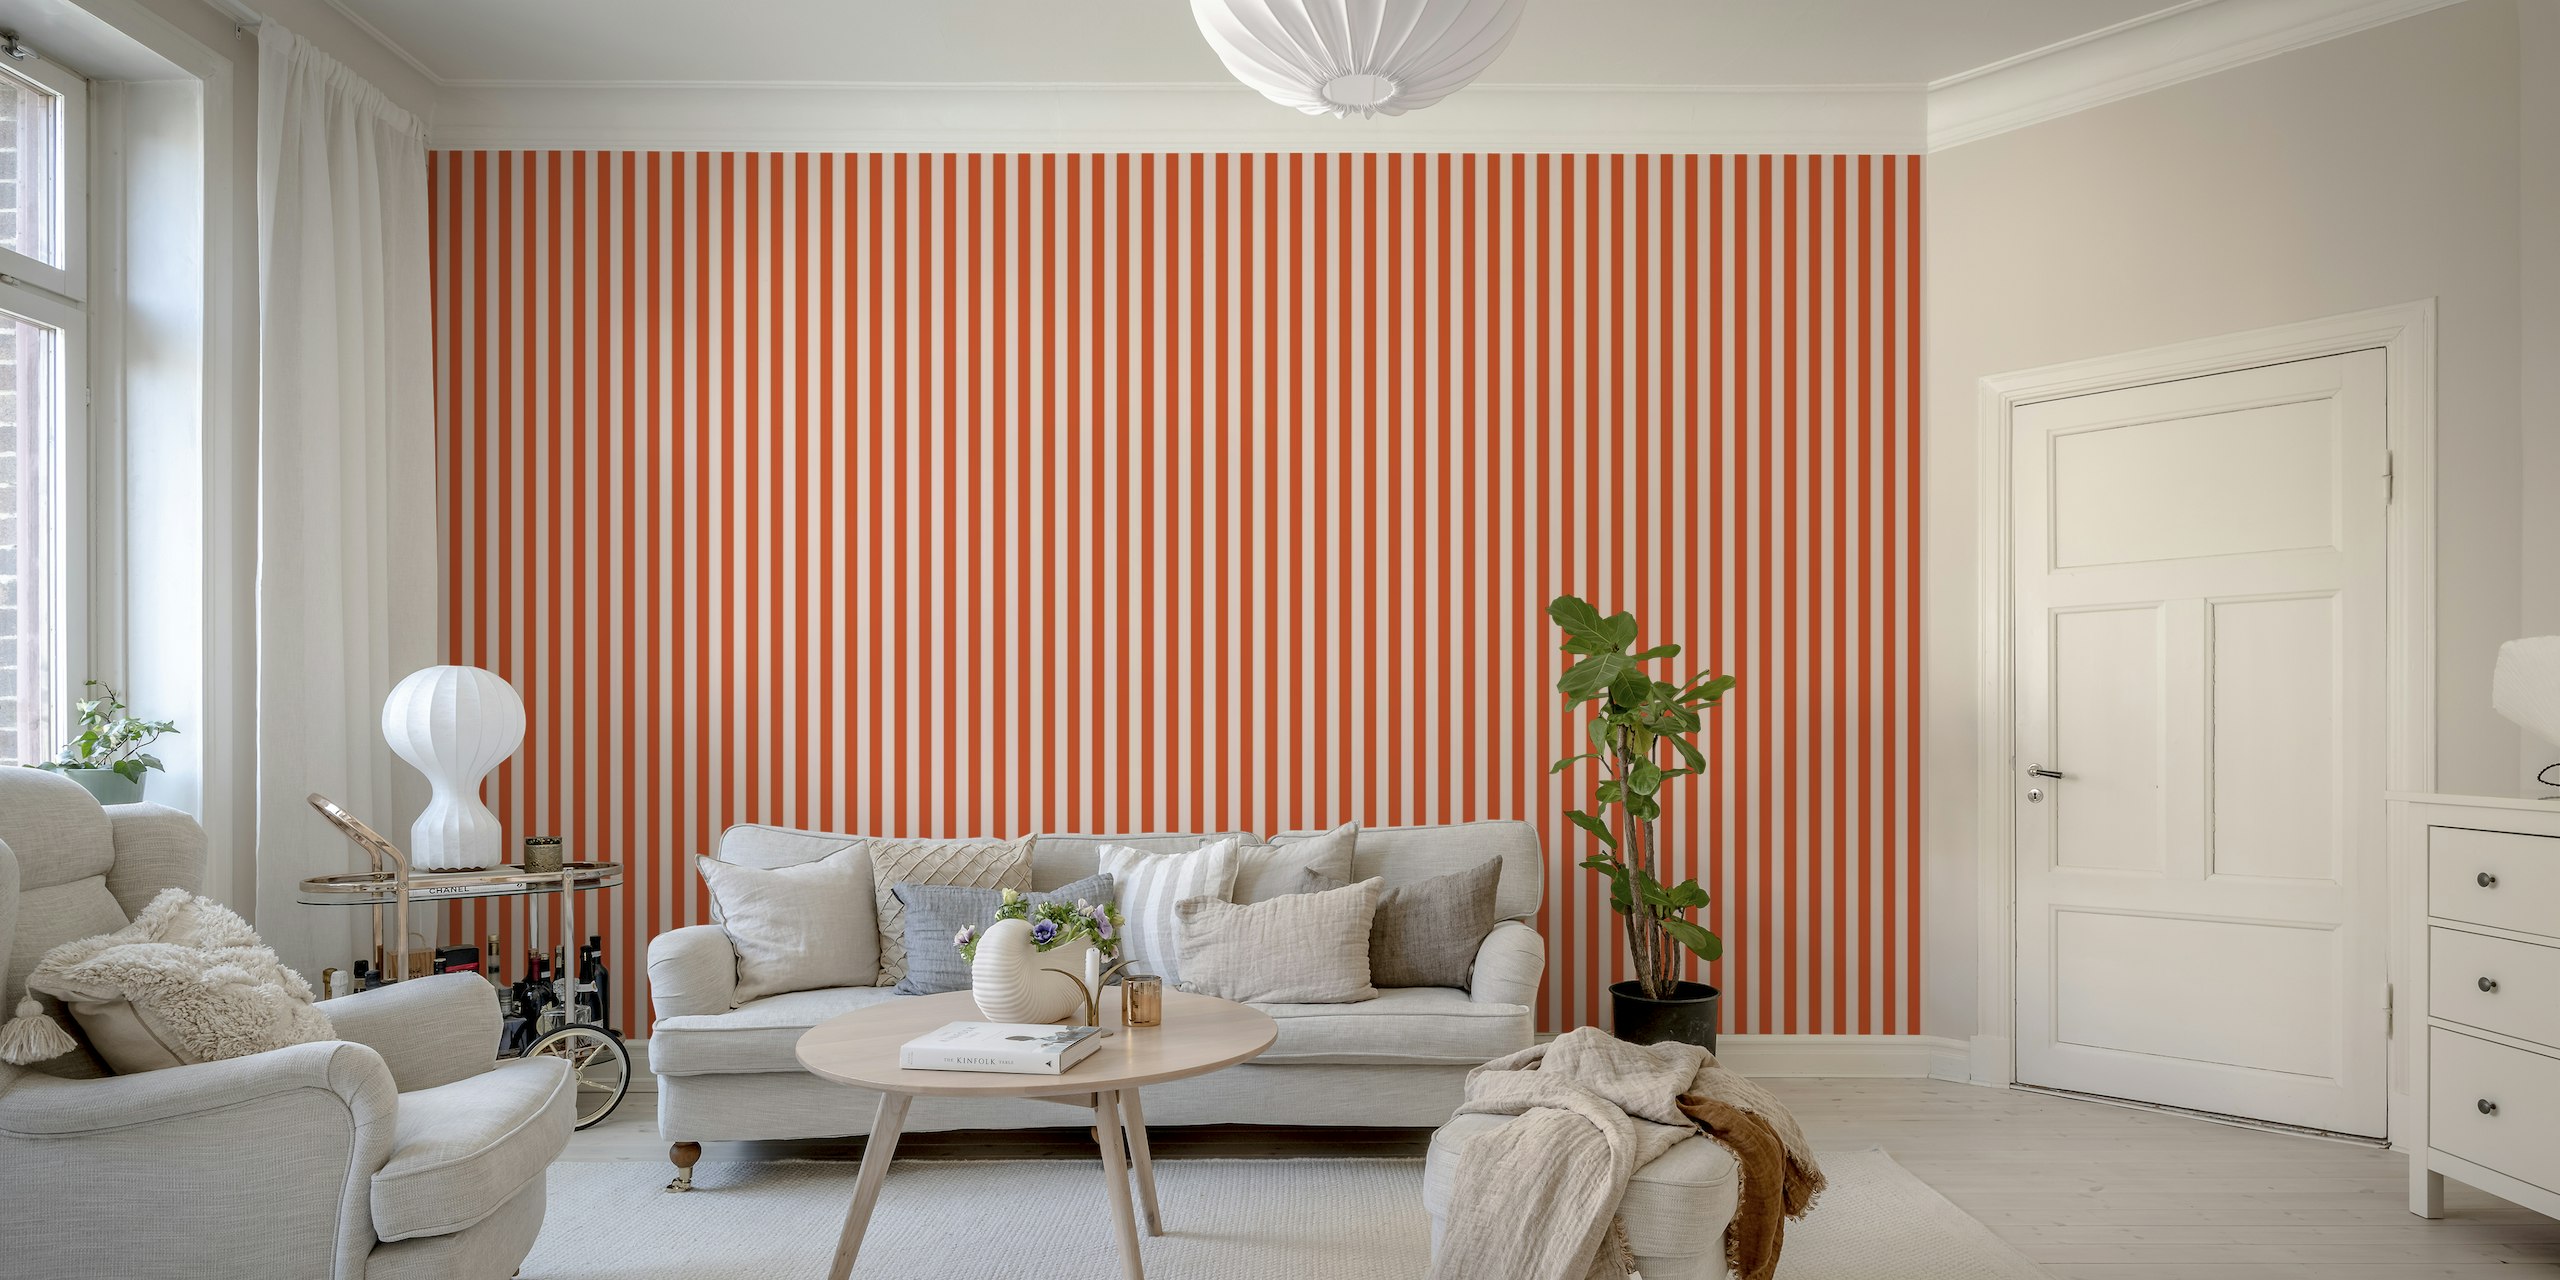 Pink and red vertical striped wall mural from Happywall